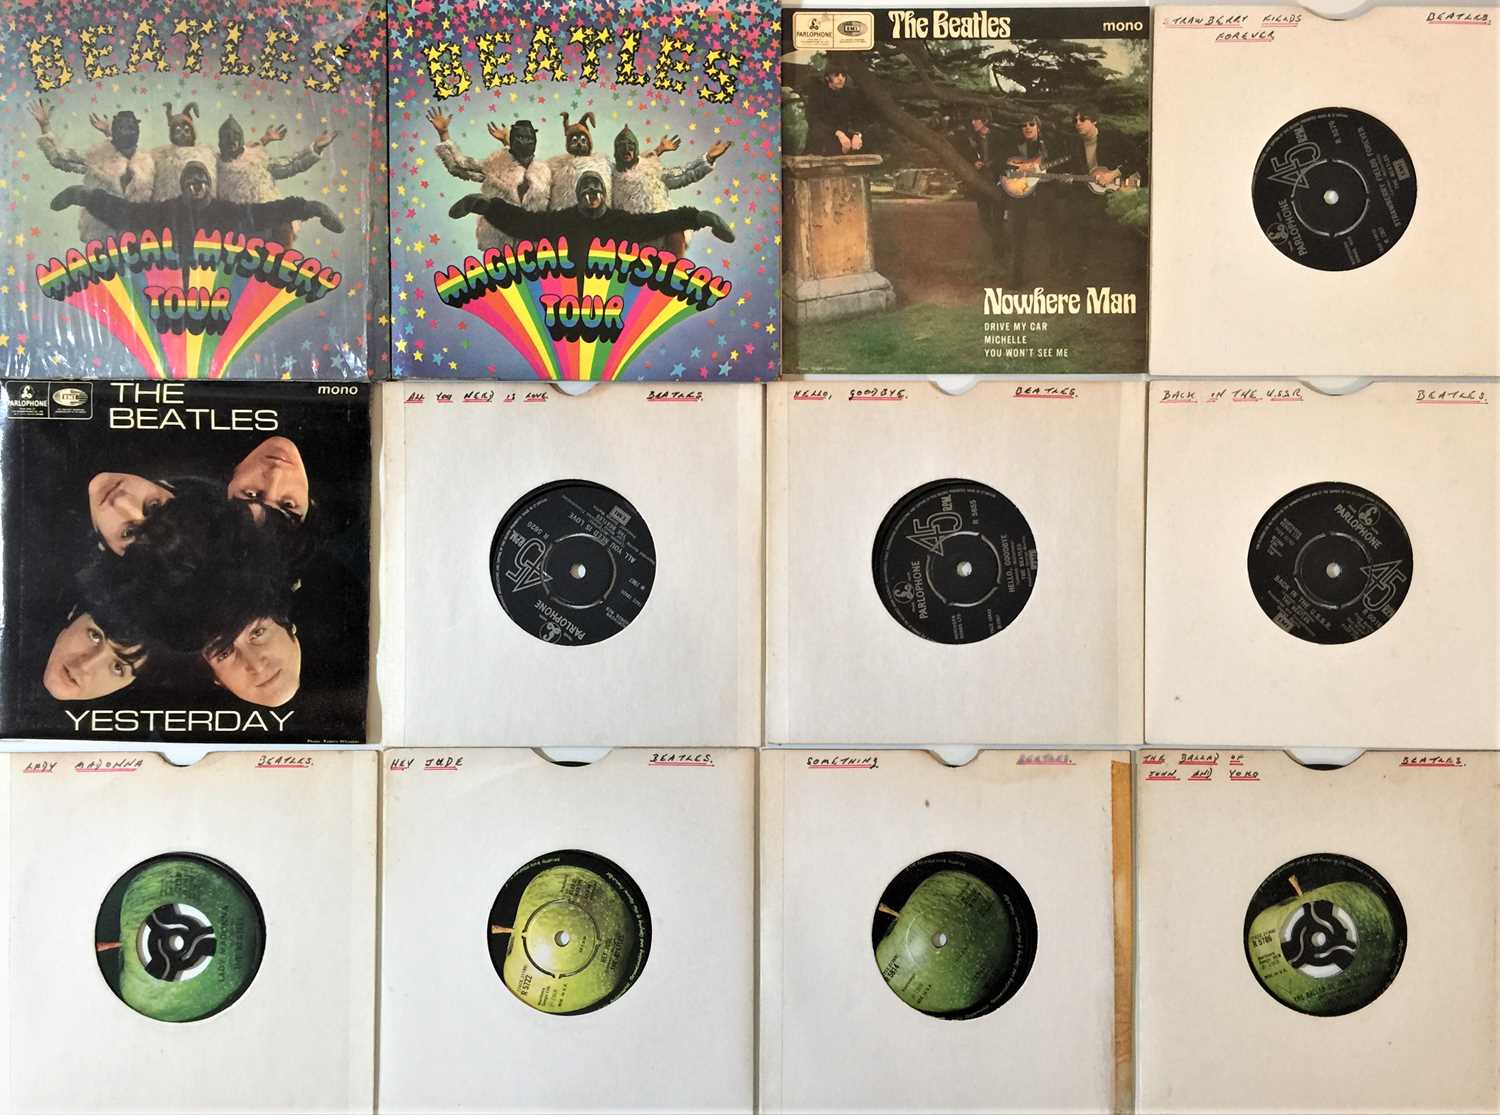 THE BEATLES - 7" COLLECTION - Image 2 of 4